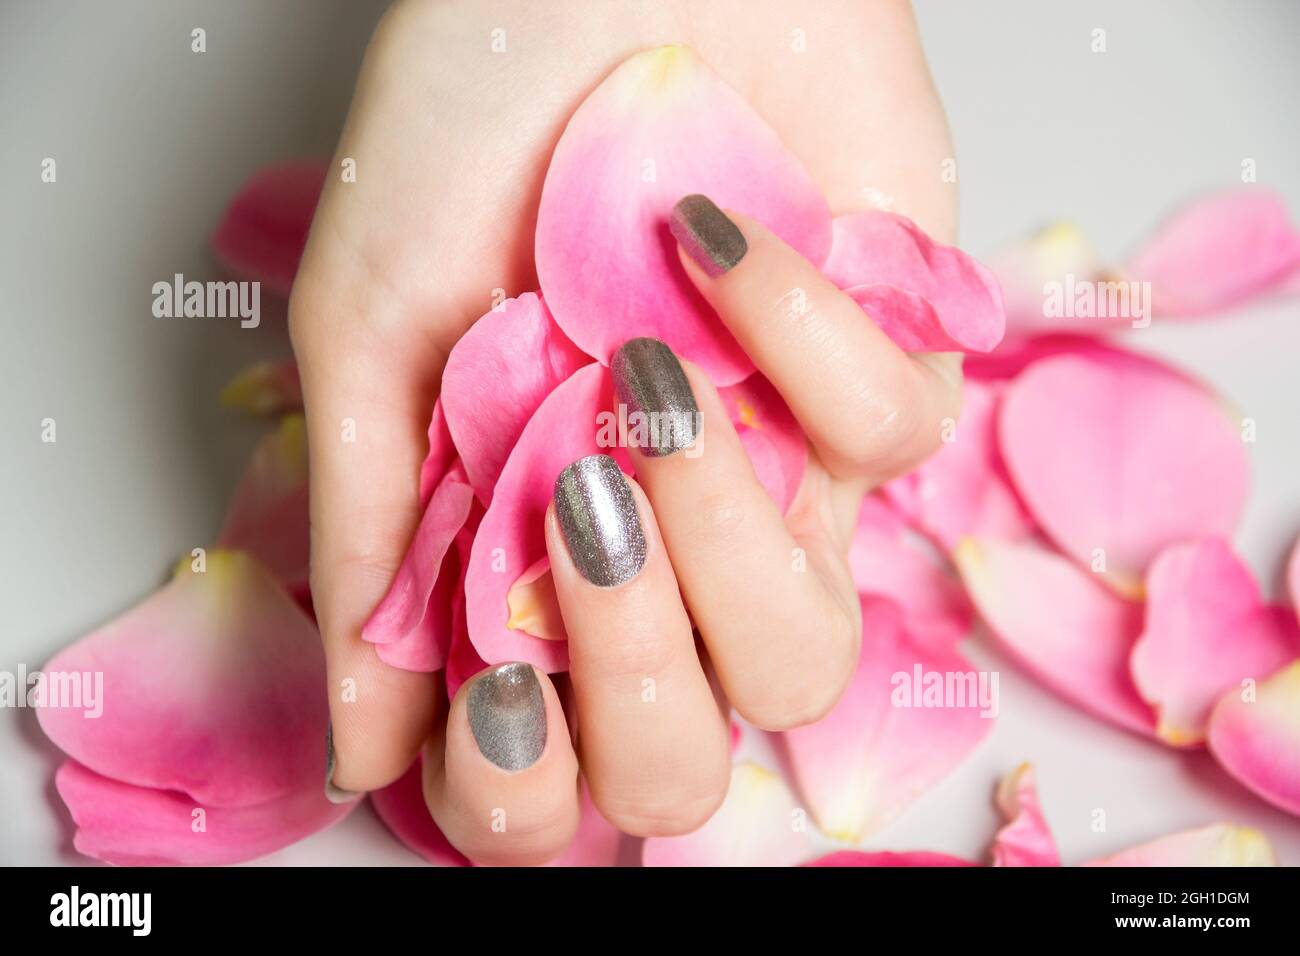 Close up of hands with metallic fingernail paint over spread out pink rose petals. Stock Photo